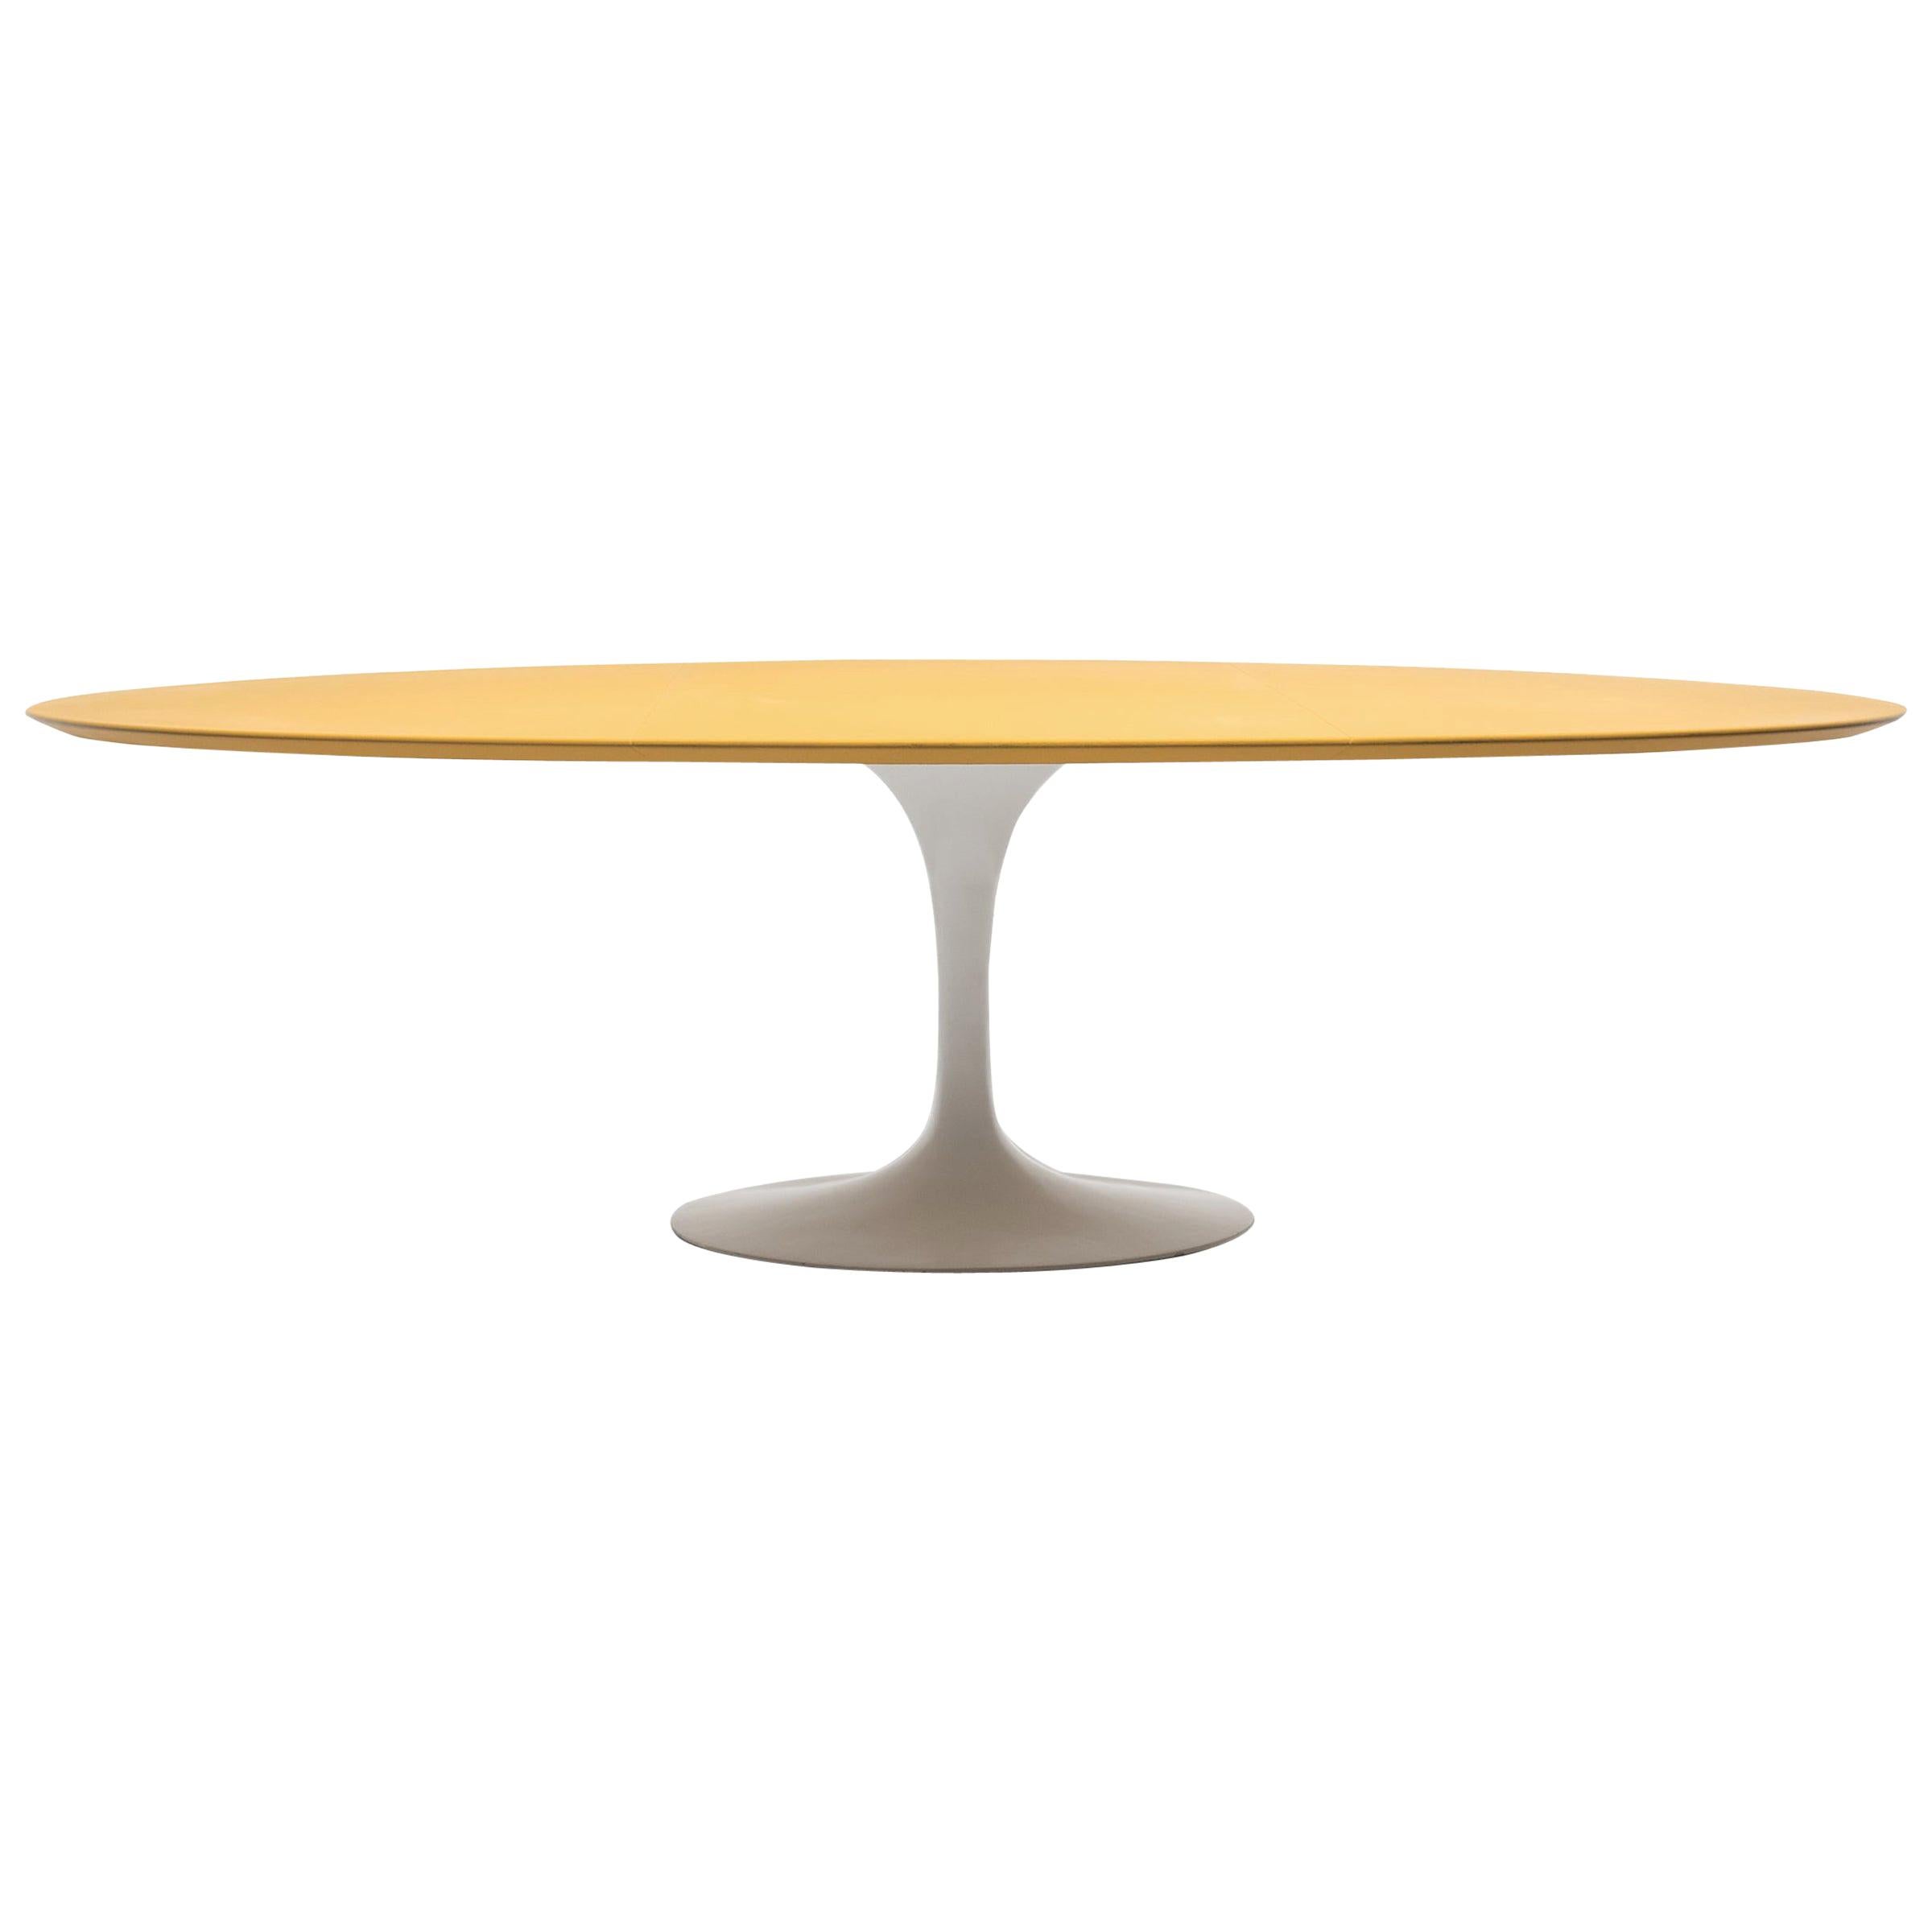 Vintage Knoll Saarinen Dining Table with Yellow Leather Top